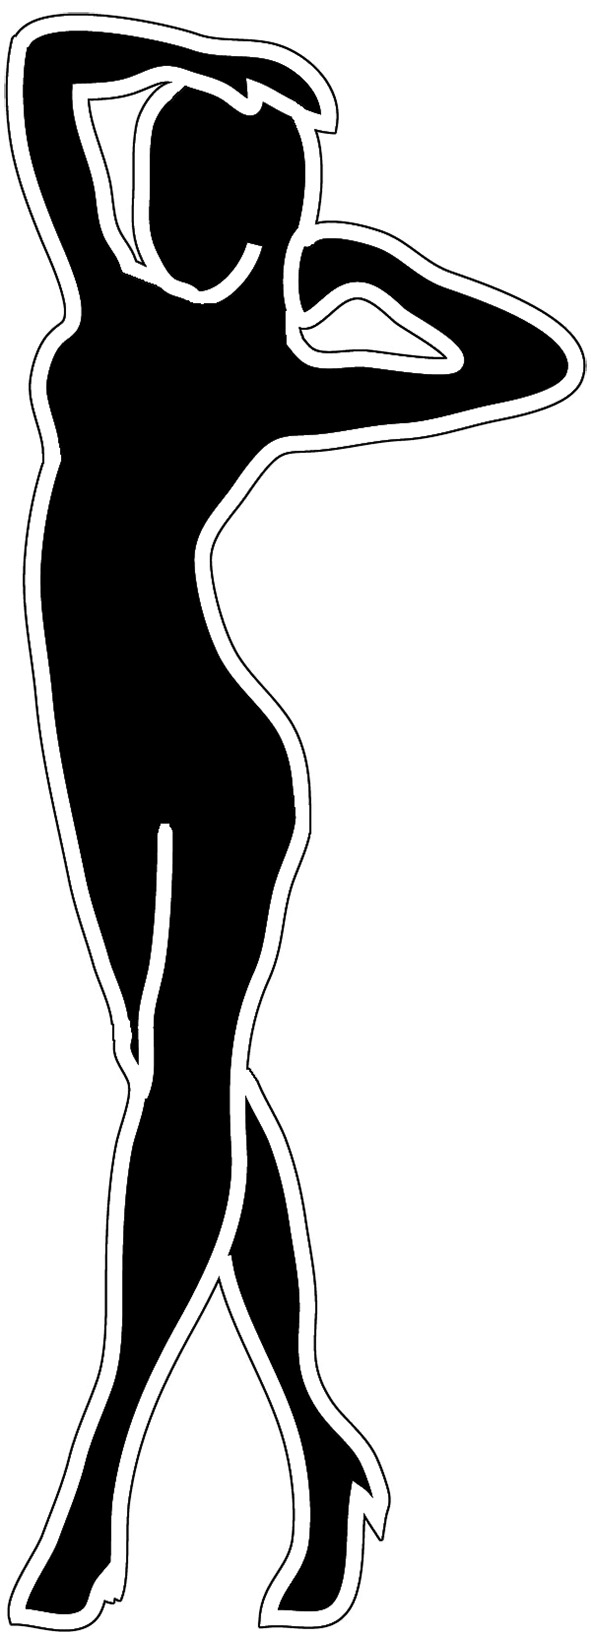 Black white silhouettes standing woman